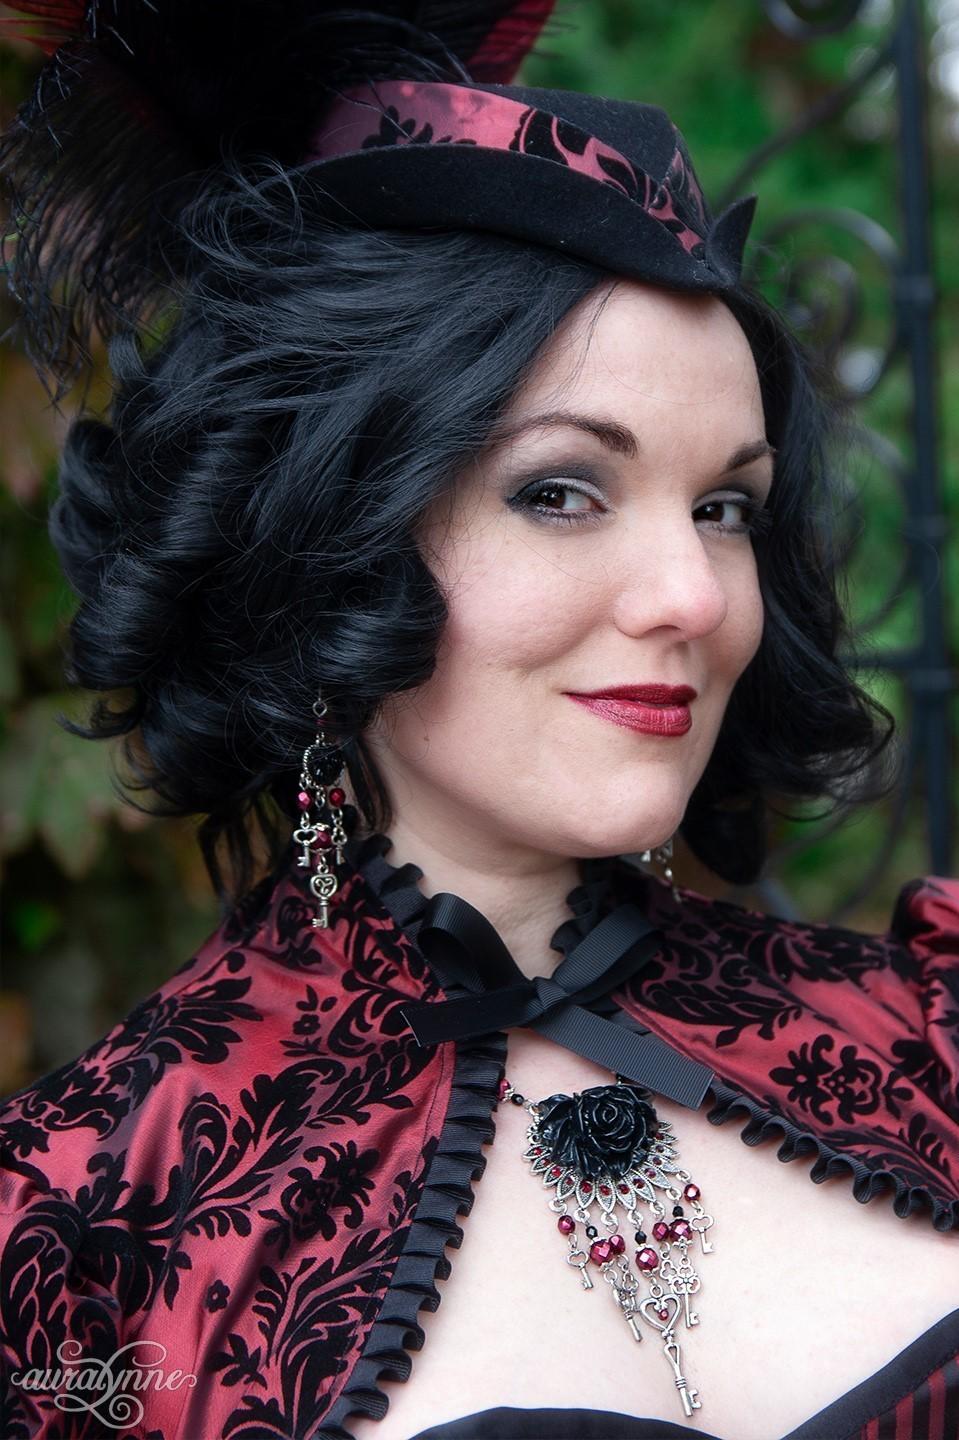 Kristi Cassidy, pictured here in 2019, is an Etsy seller that makes gothic, Victorian gowns and costumes. She is one of the organizers behind the Etsy sellers strike.